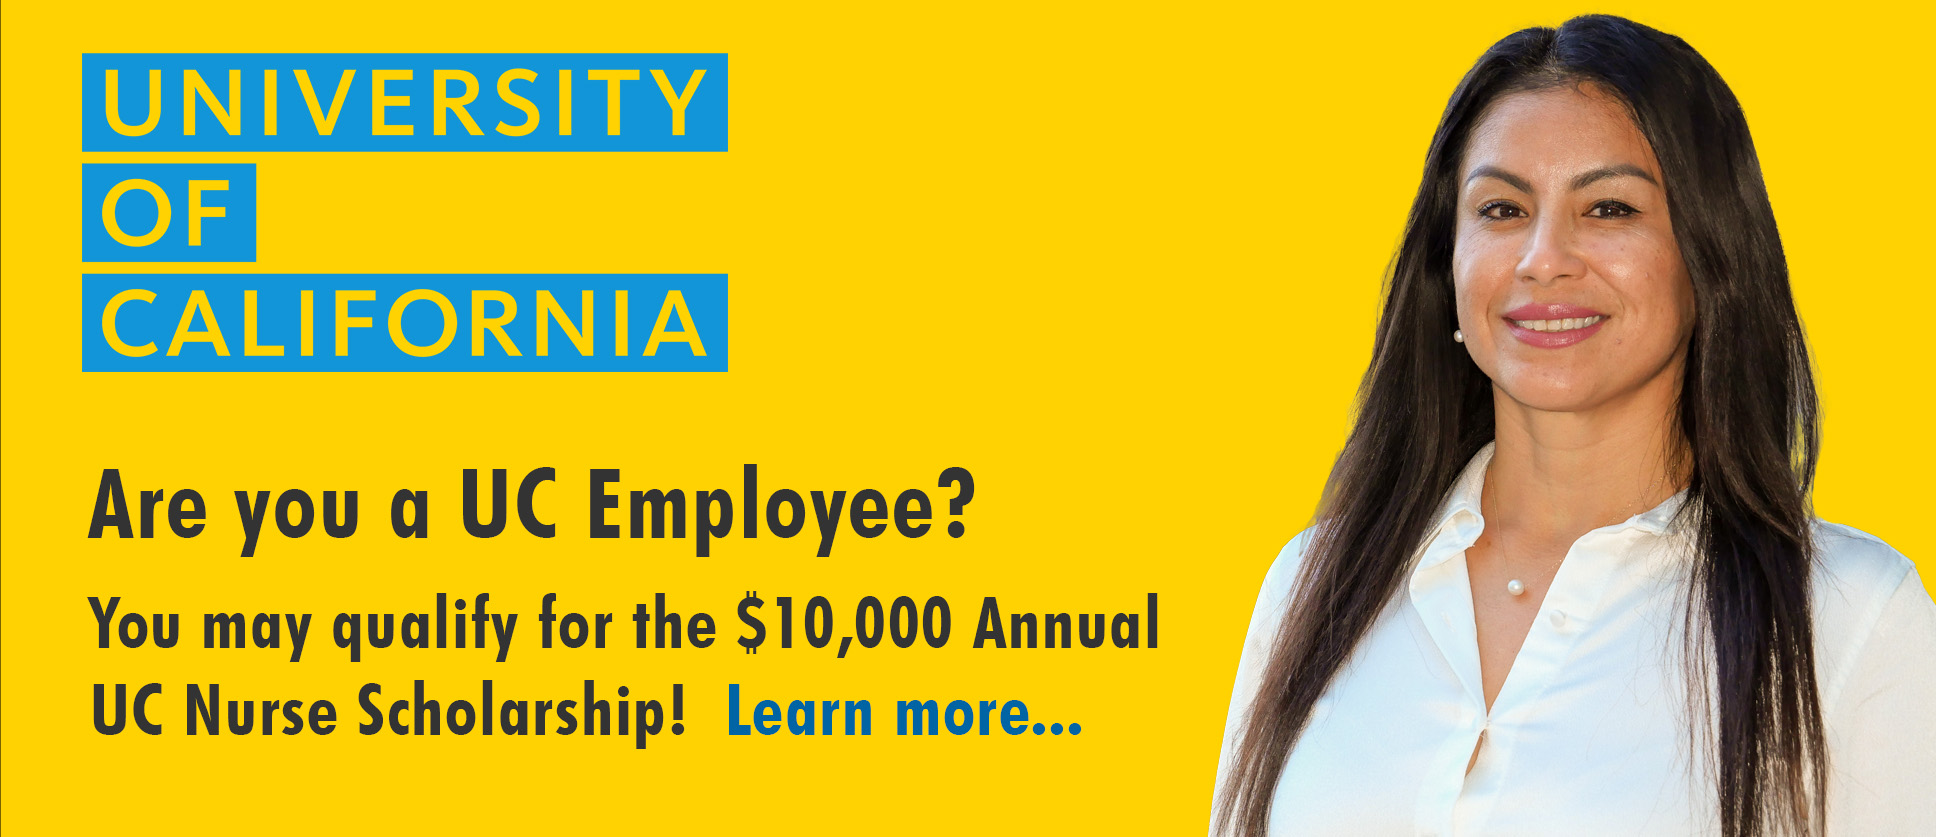 Learn about the UC Nurse Scholarship for current UC employees